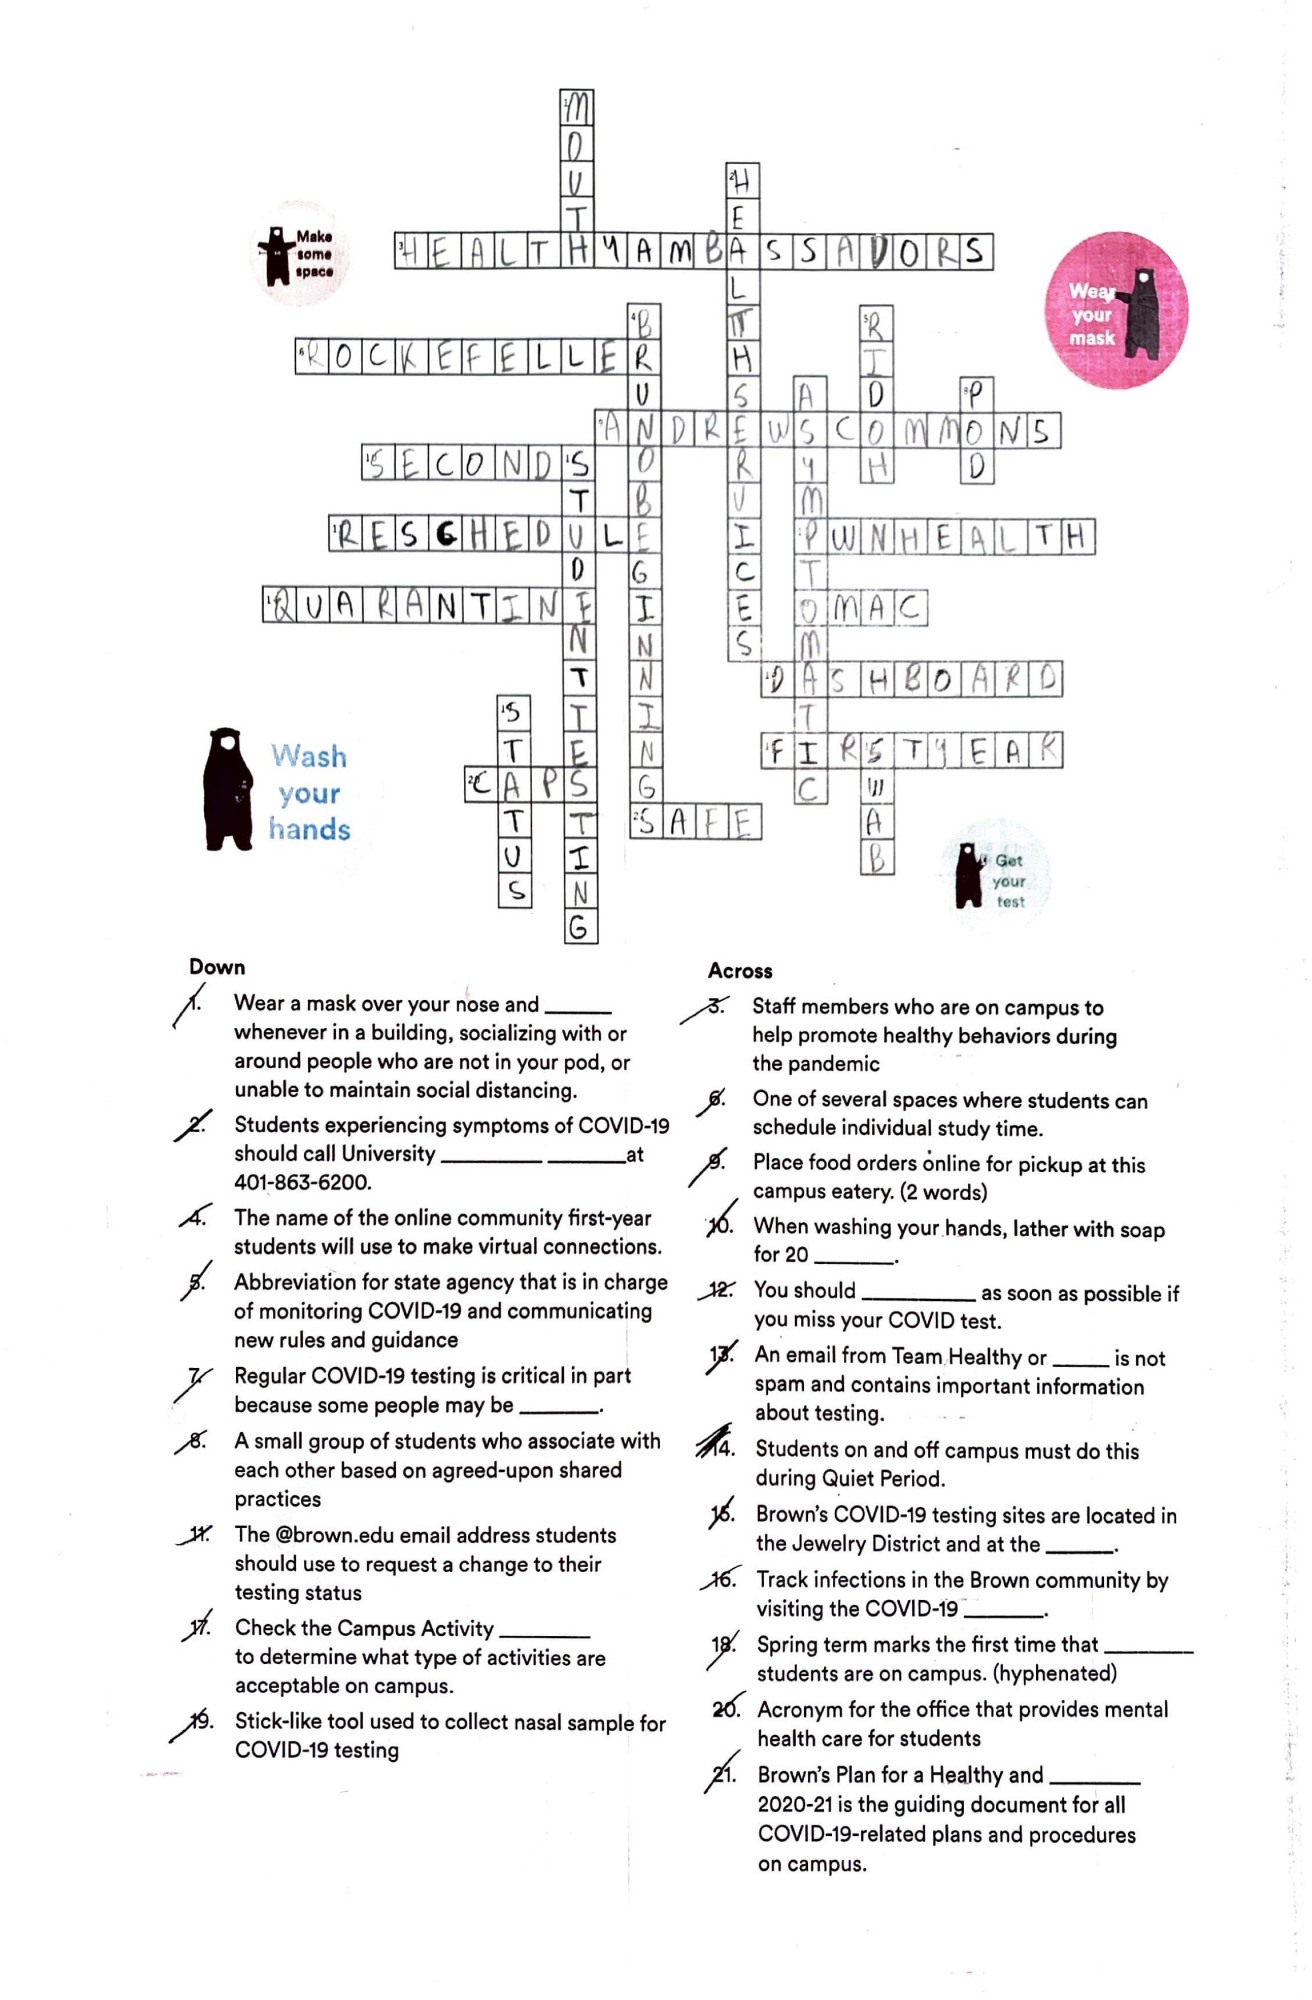 Brown Takes Care Crossword Puzzle with answers, listed below